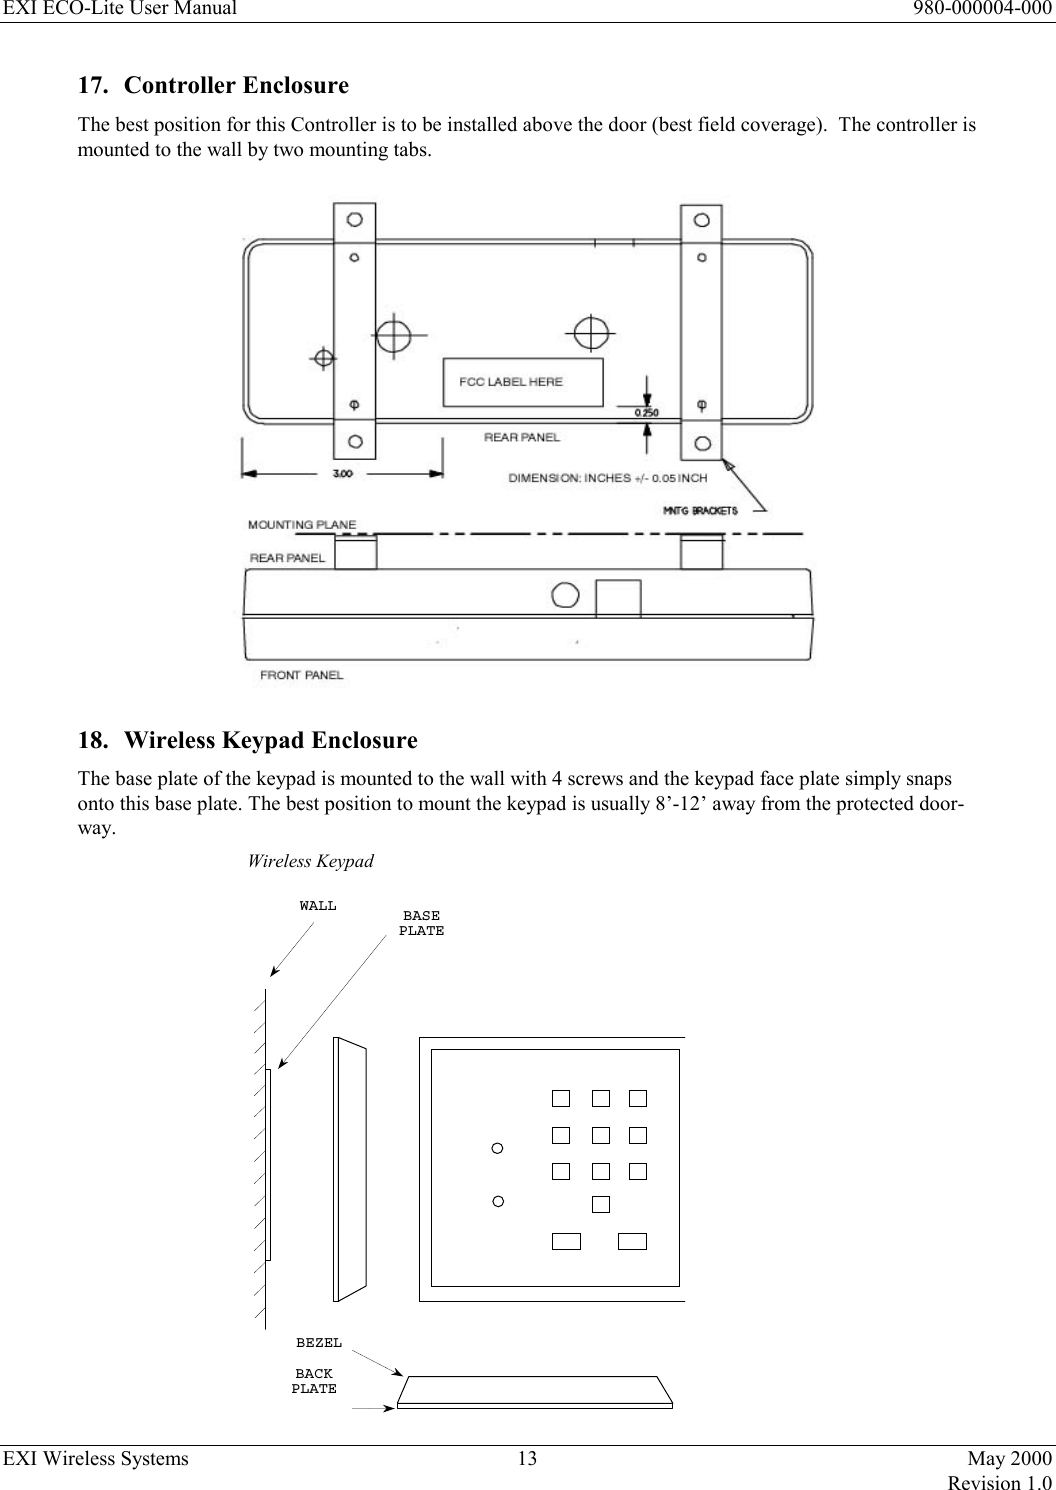 EXI ECO-Lite User Manual      980-000004-000 EXI Wireless Systems  13  May 2000   Revision 1.0  17. Controller Enclosure The best position for this Controller is to be installed above the door (best field coverage).  The controller is mounted to the wall by two mounting tabs.    18.  Wireless Keypad Enclosure The base plate of the keypad is mounted to the wall with 4 screws and the keypad face plate simply snaps onto this base plate. The best position to mount the keypad is usually 8’-12’ away from the protected door-way.  Wireless Keypad  WALLBASEPLATEBACKPLATEBEZEL